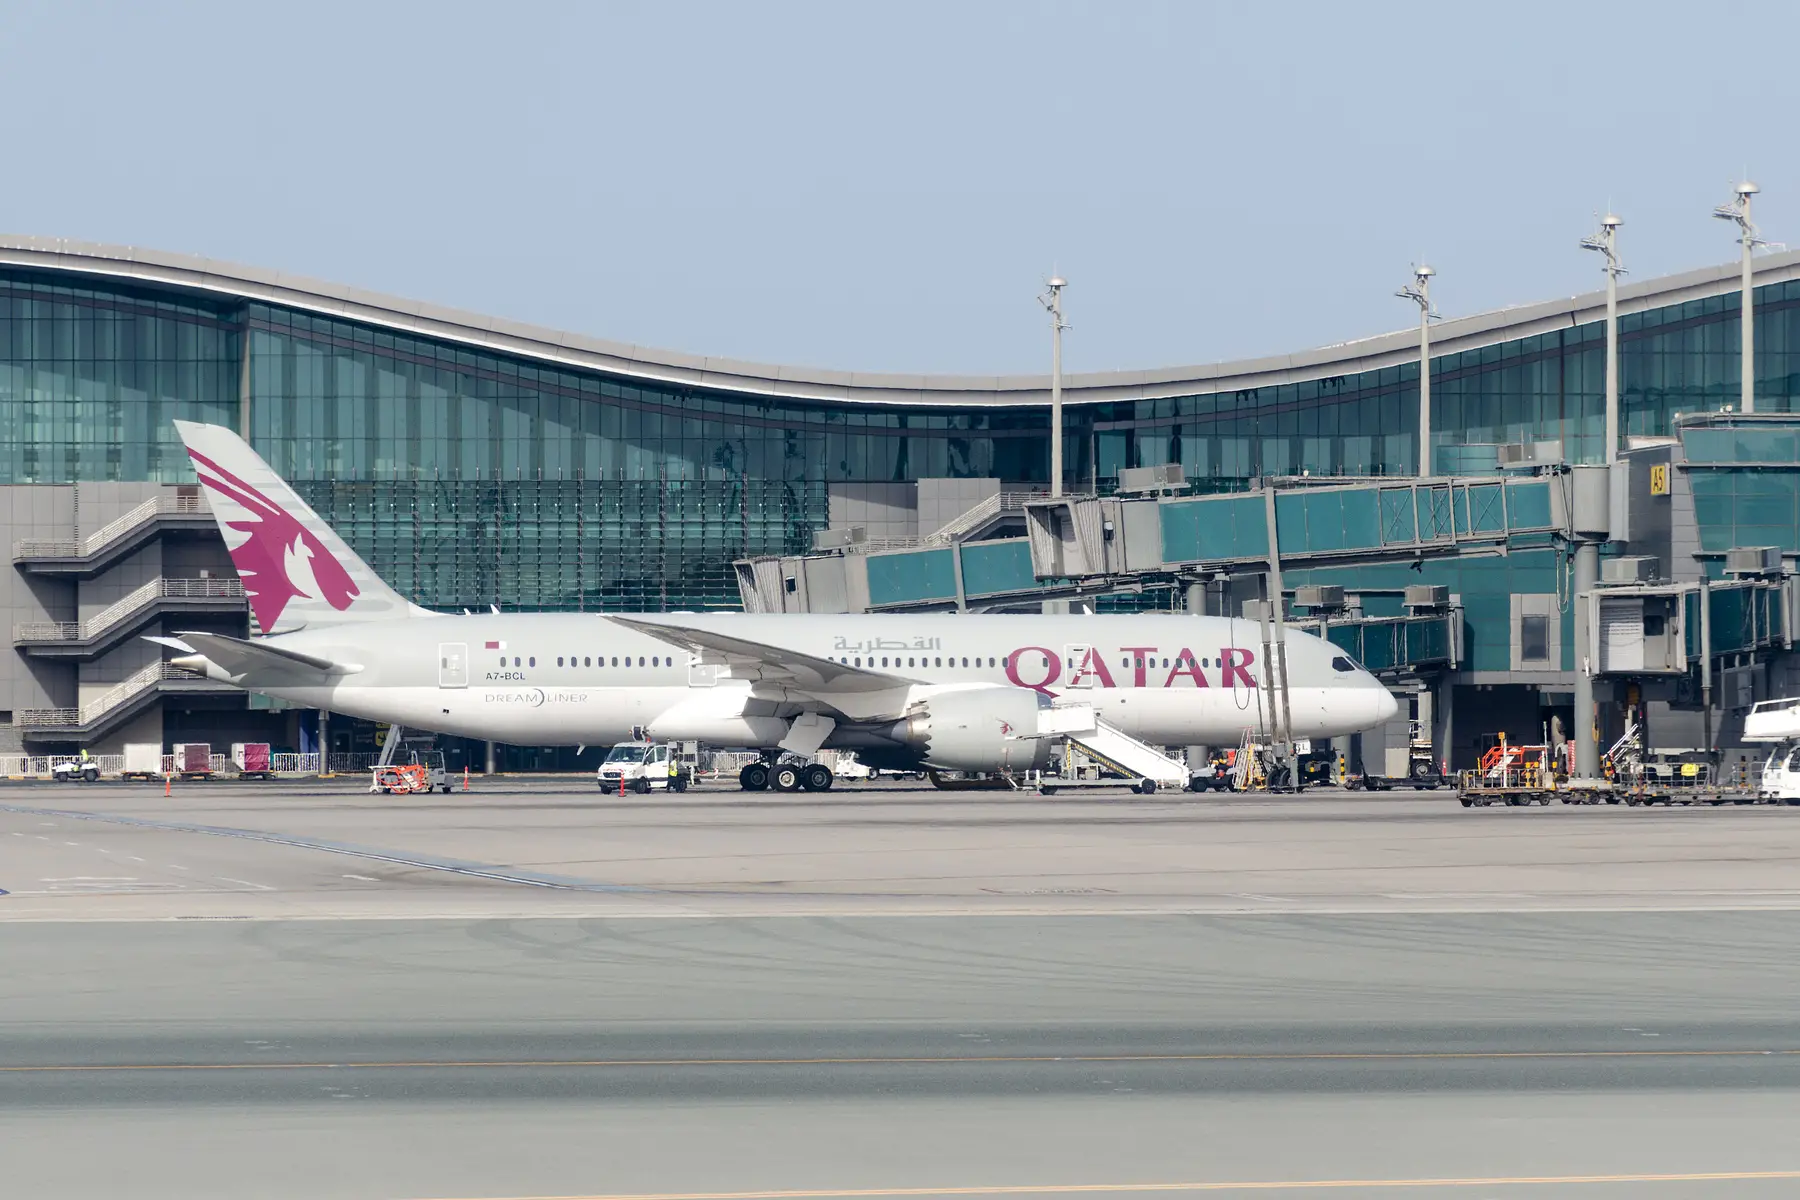 a Qatar Airlines plane at Hamad International Airport